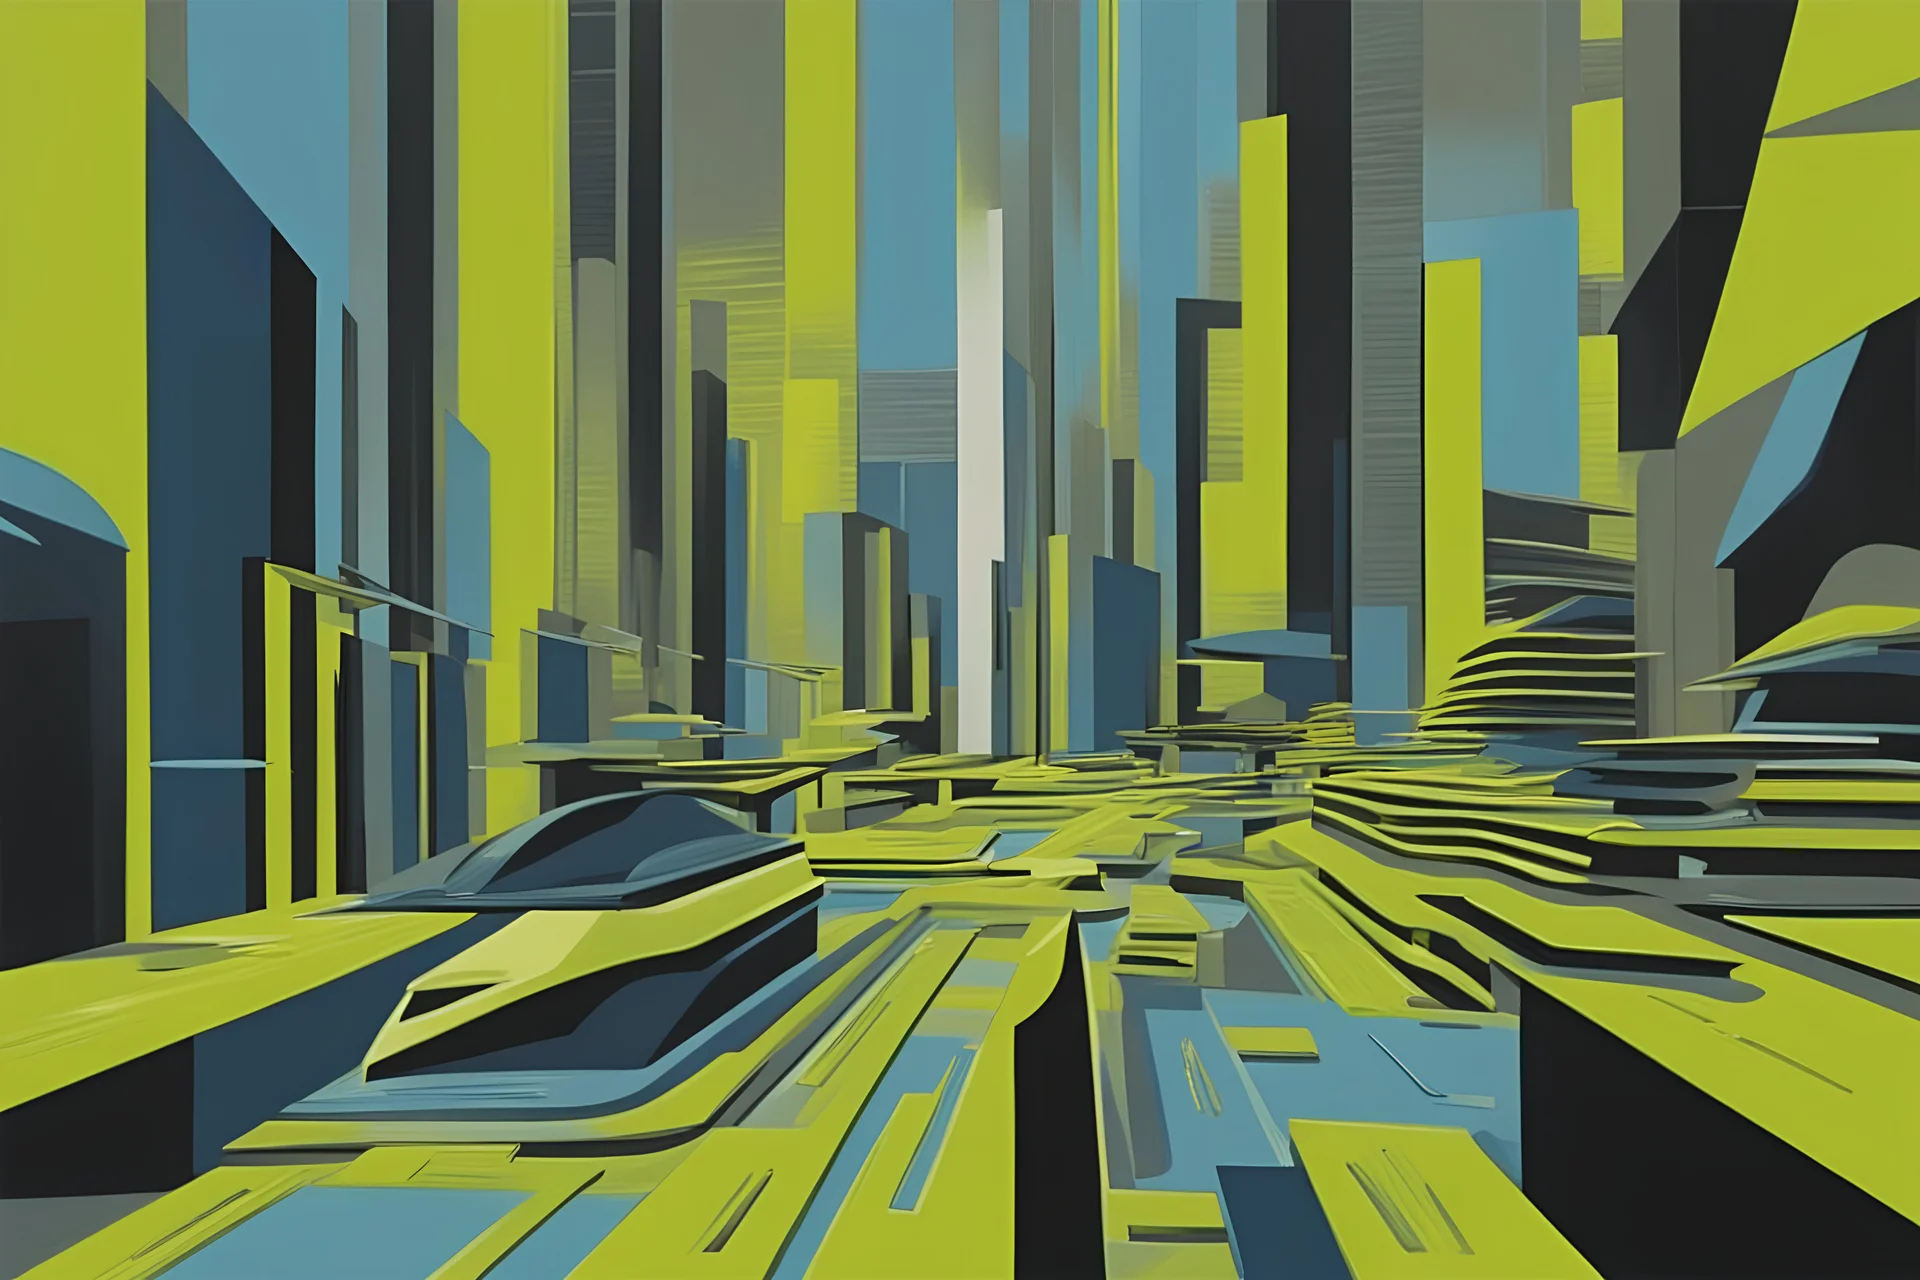 retro futurism style hustle and bustle, loop kick, (deconstruct:43), urban canyon, centered, great verticals, great parallels, hard edge, colors of metallic chartreuse and metallic steel blue